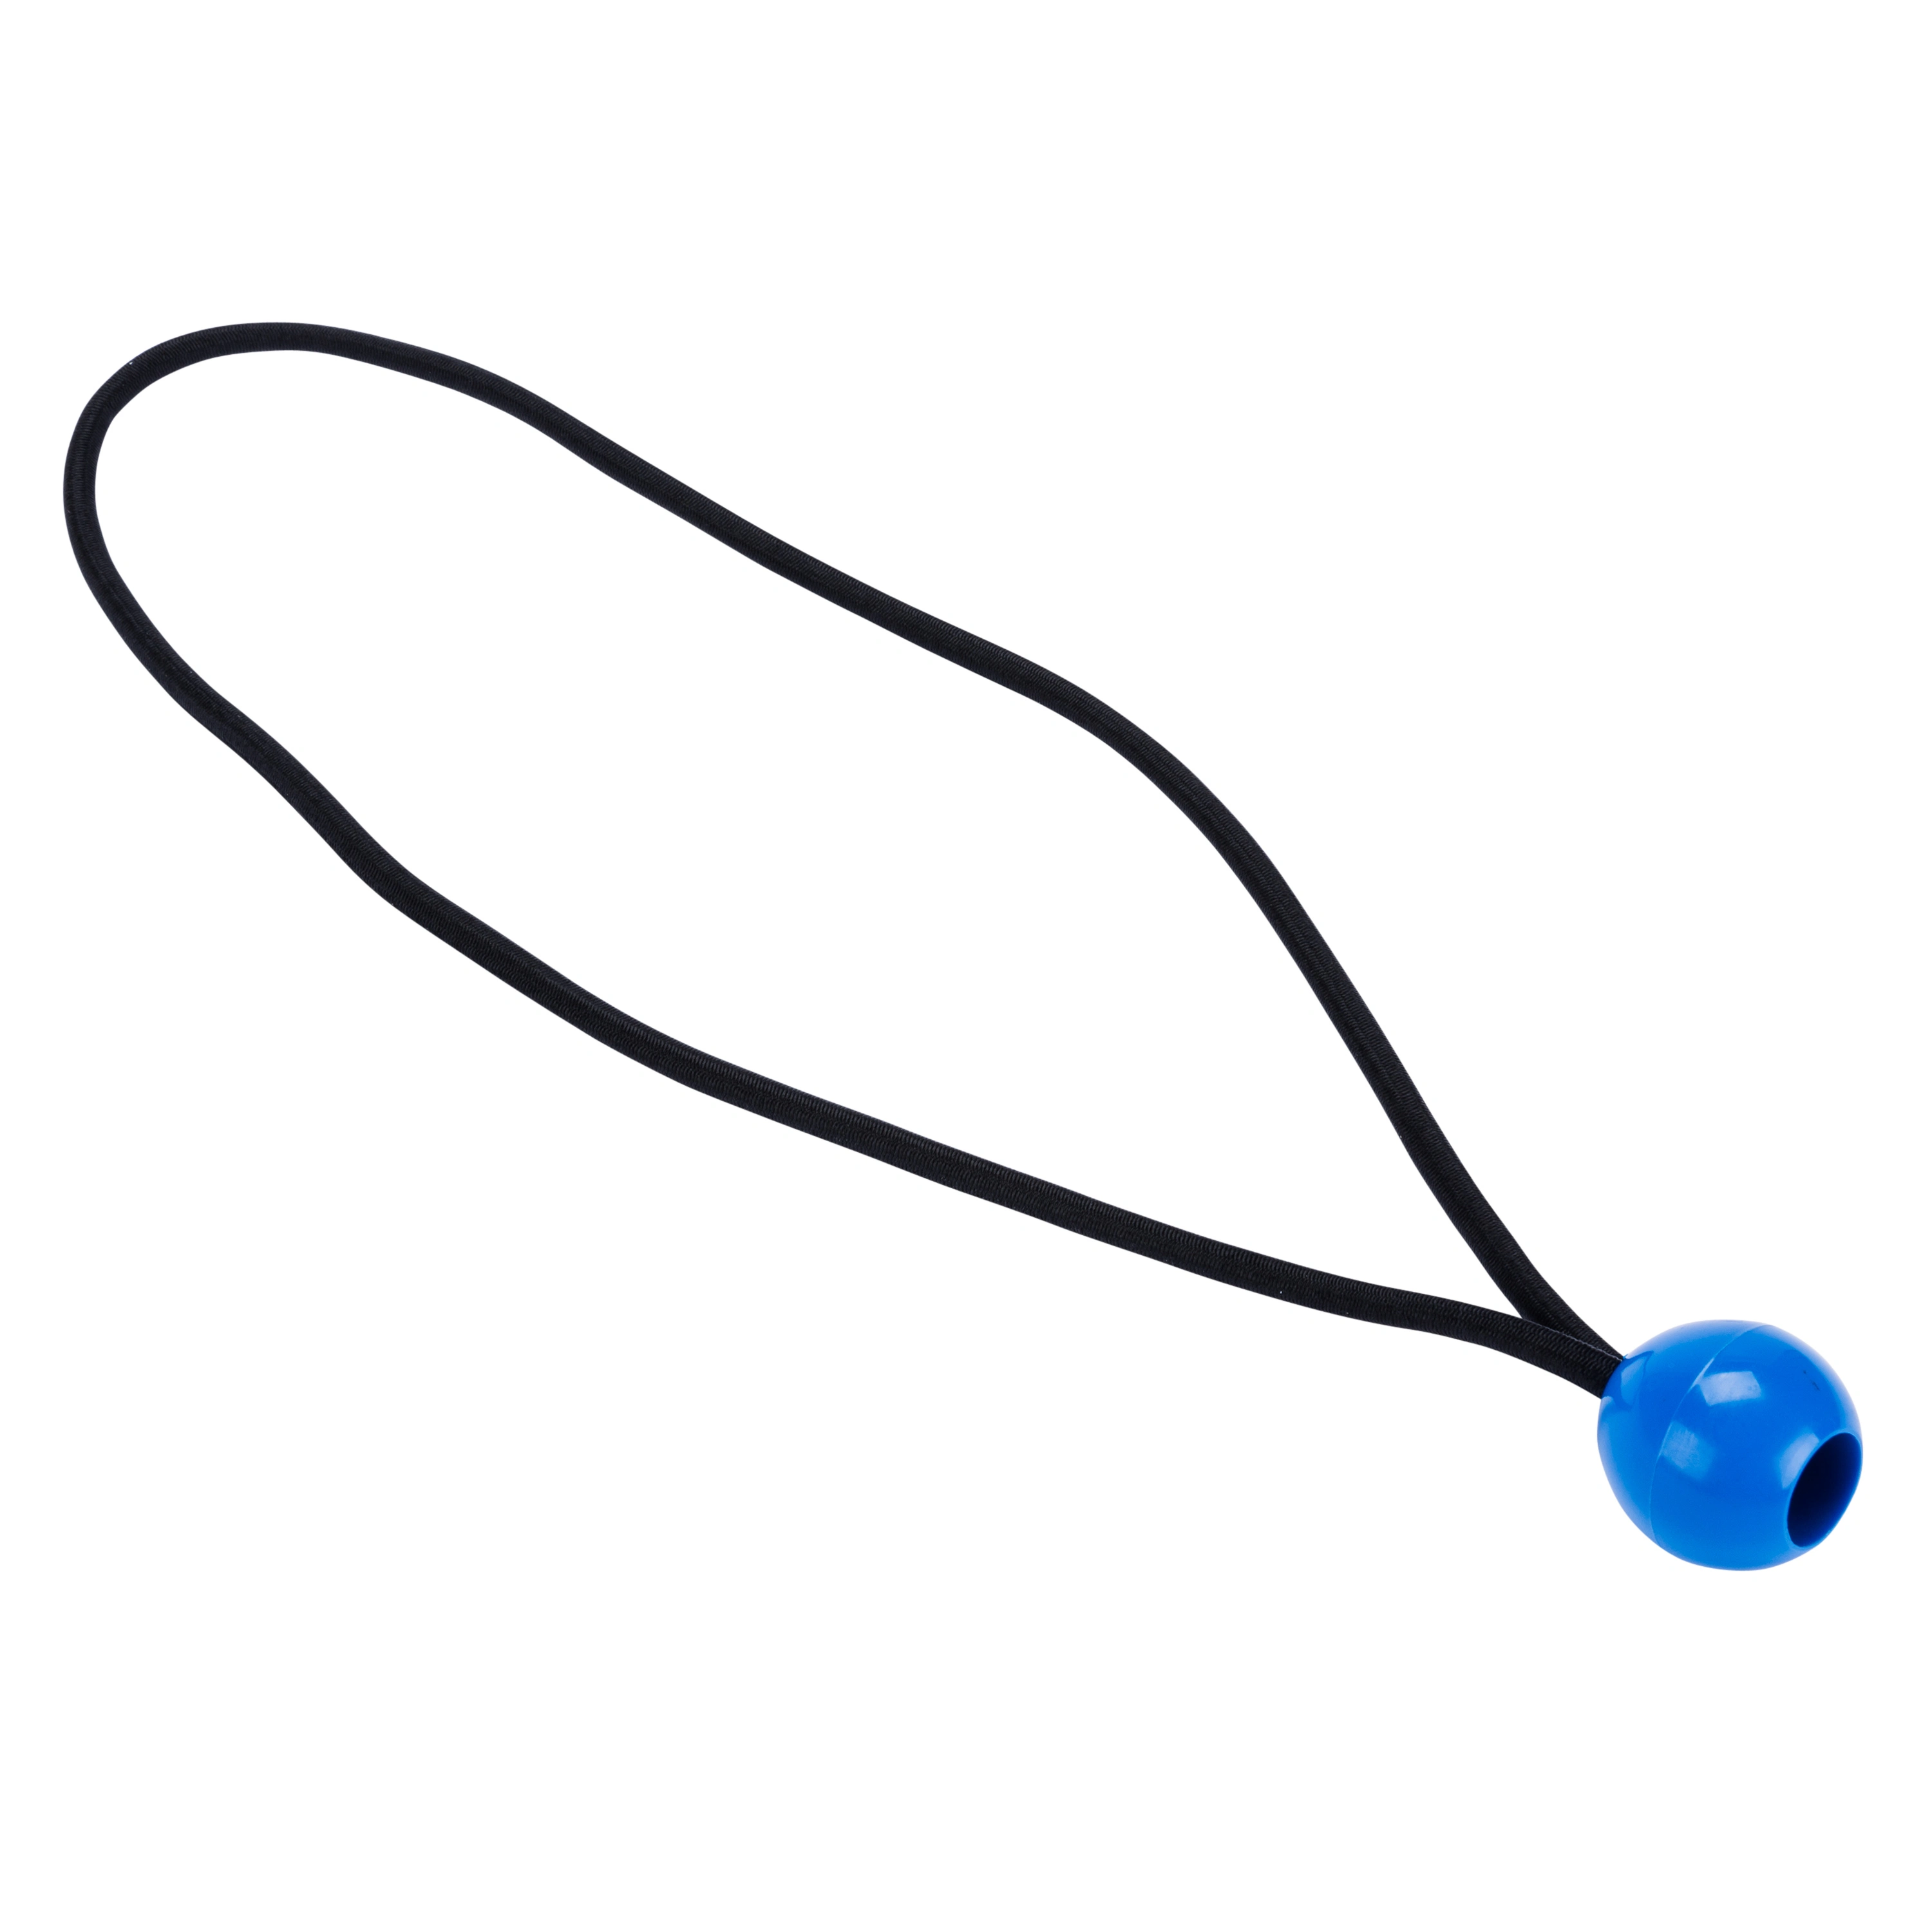 12" Bungee Cords with Toggle Ball variant image view